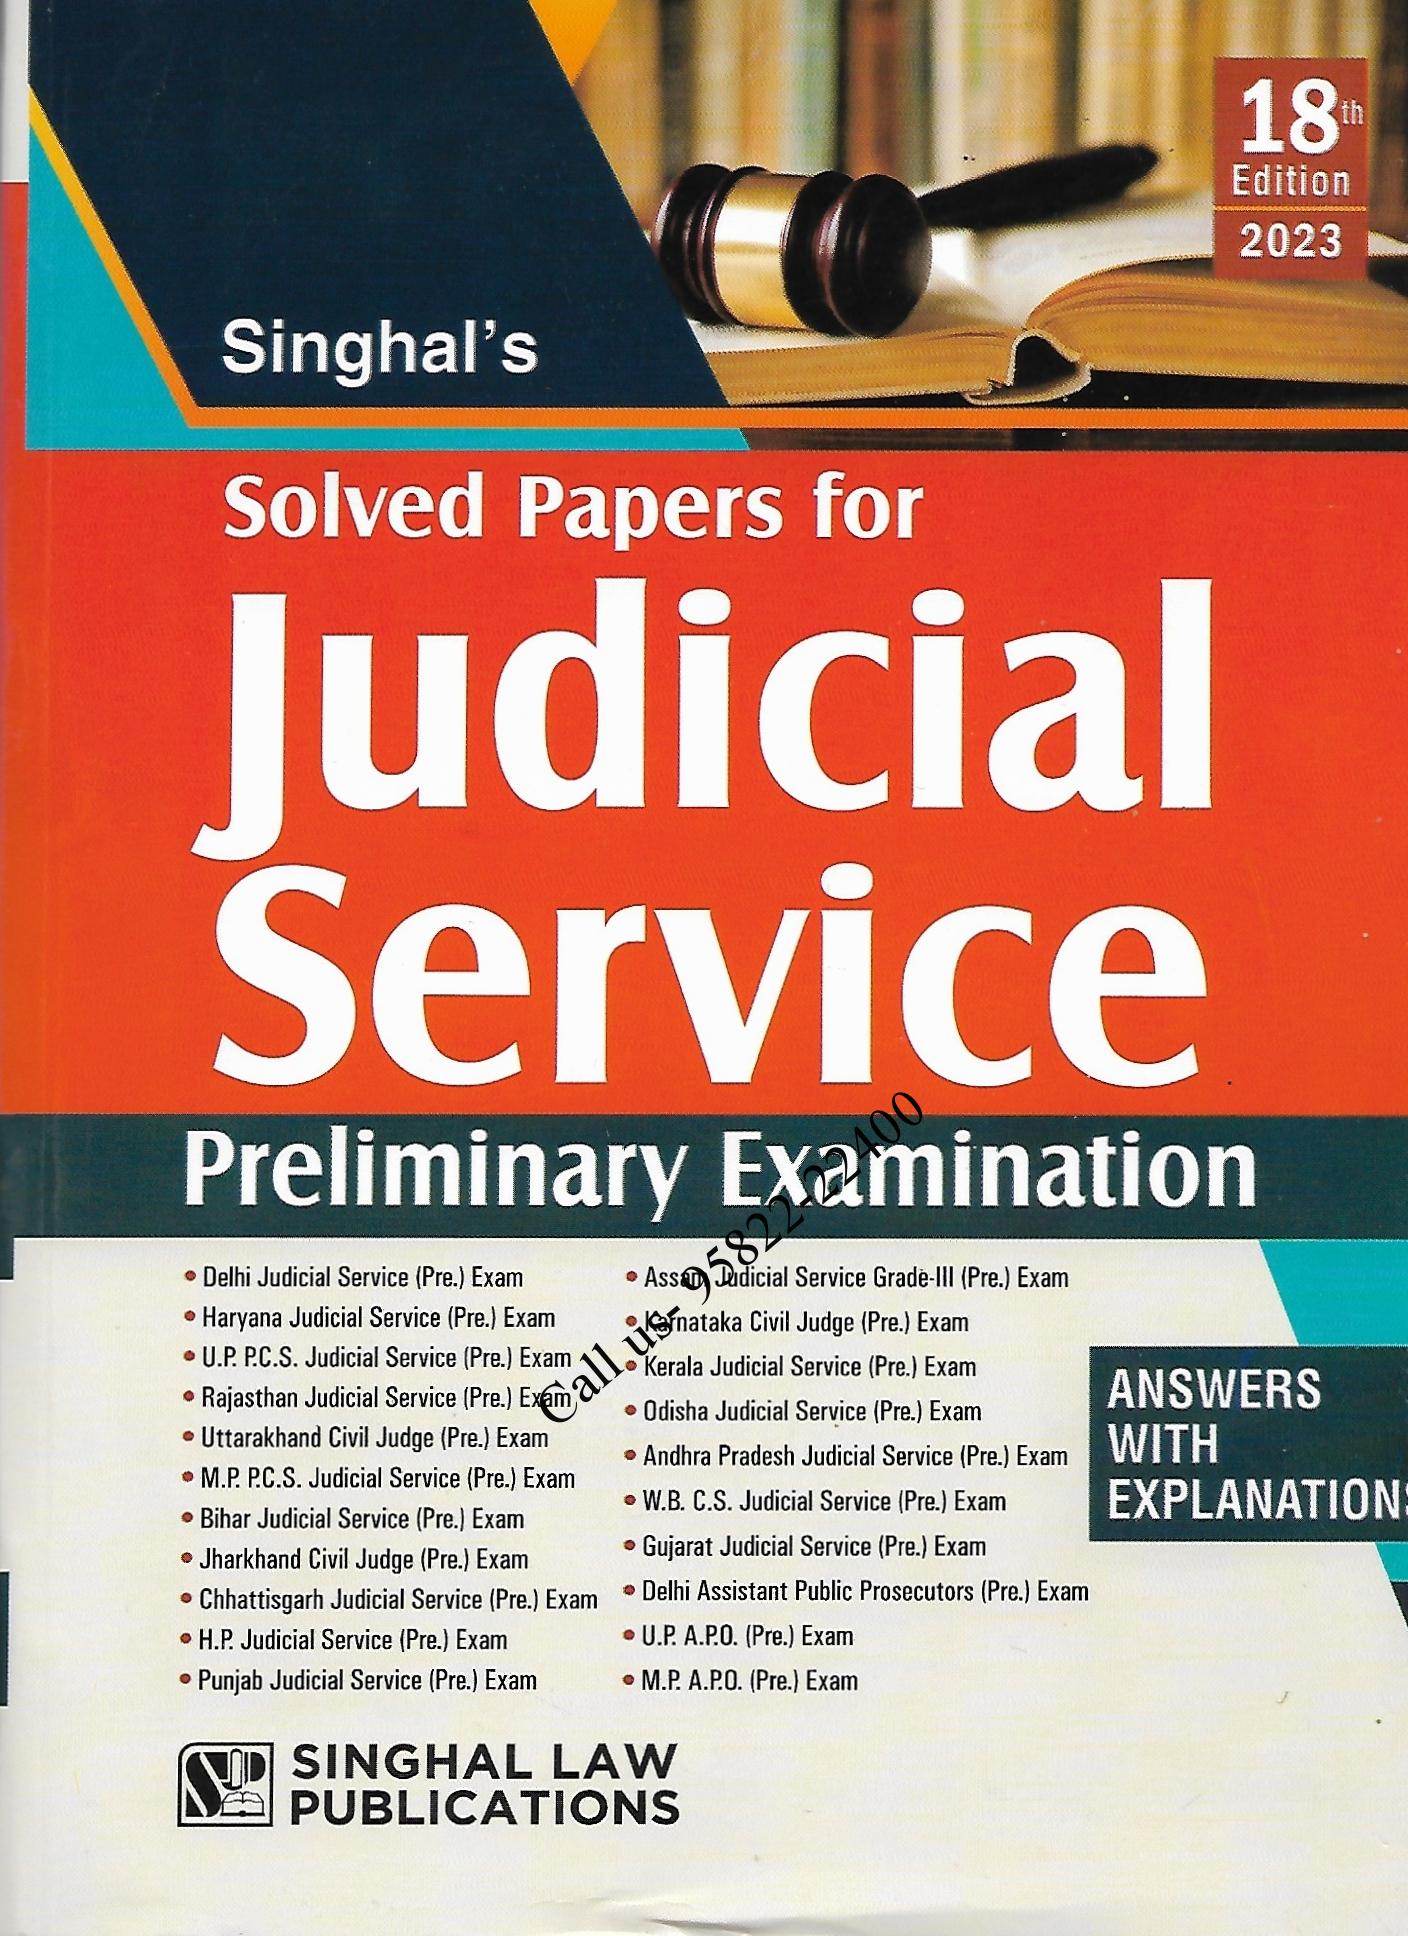 Singhal’s Solved Papers for Judicial Service (Preliminary Examination) [18th Edition] 2023